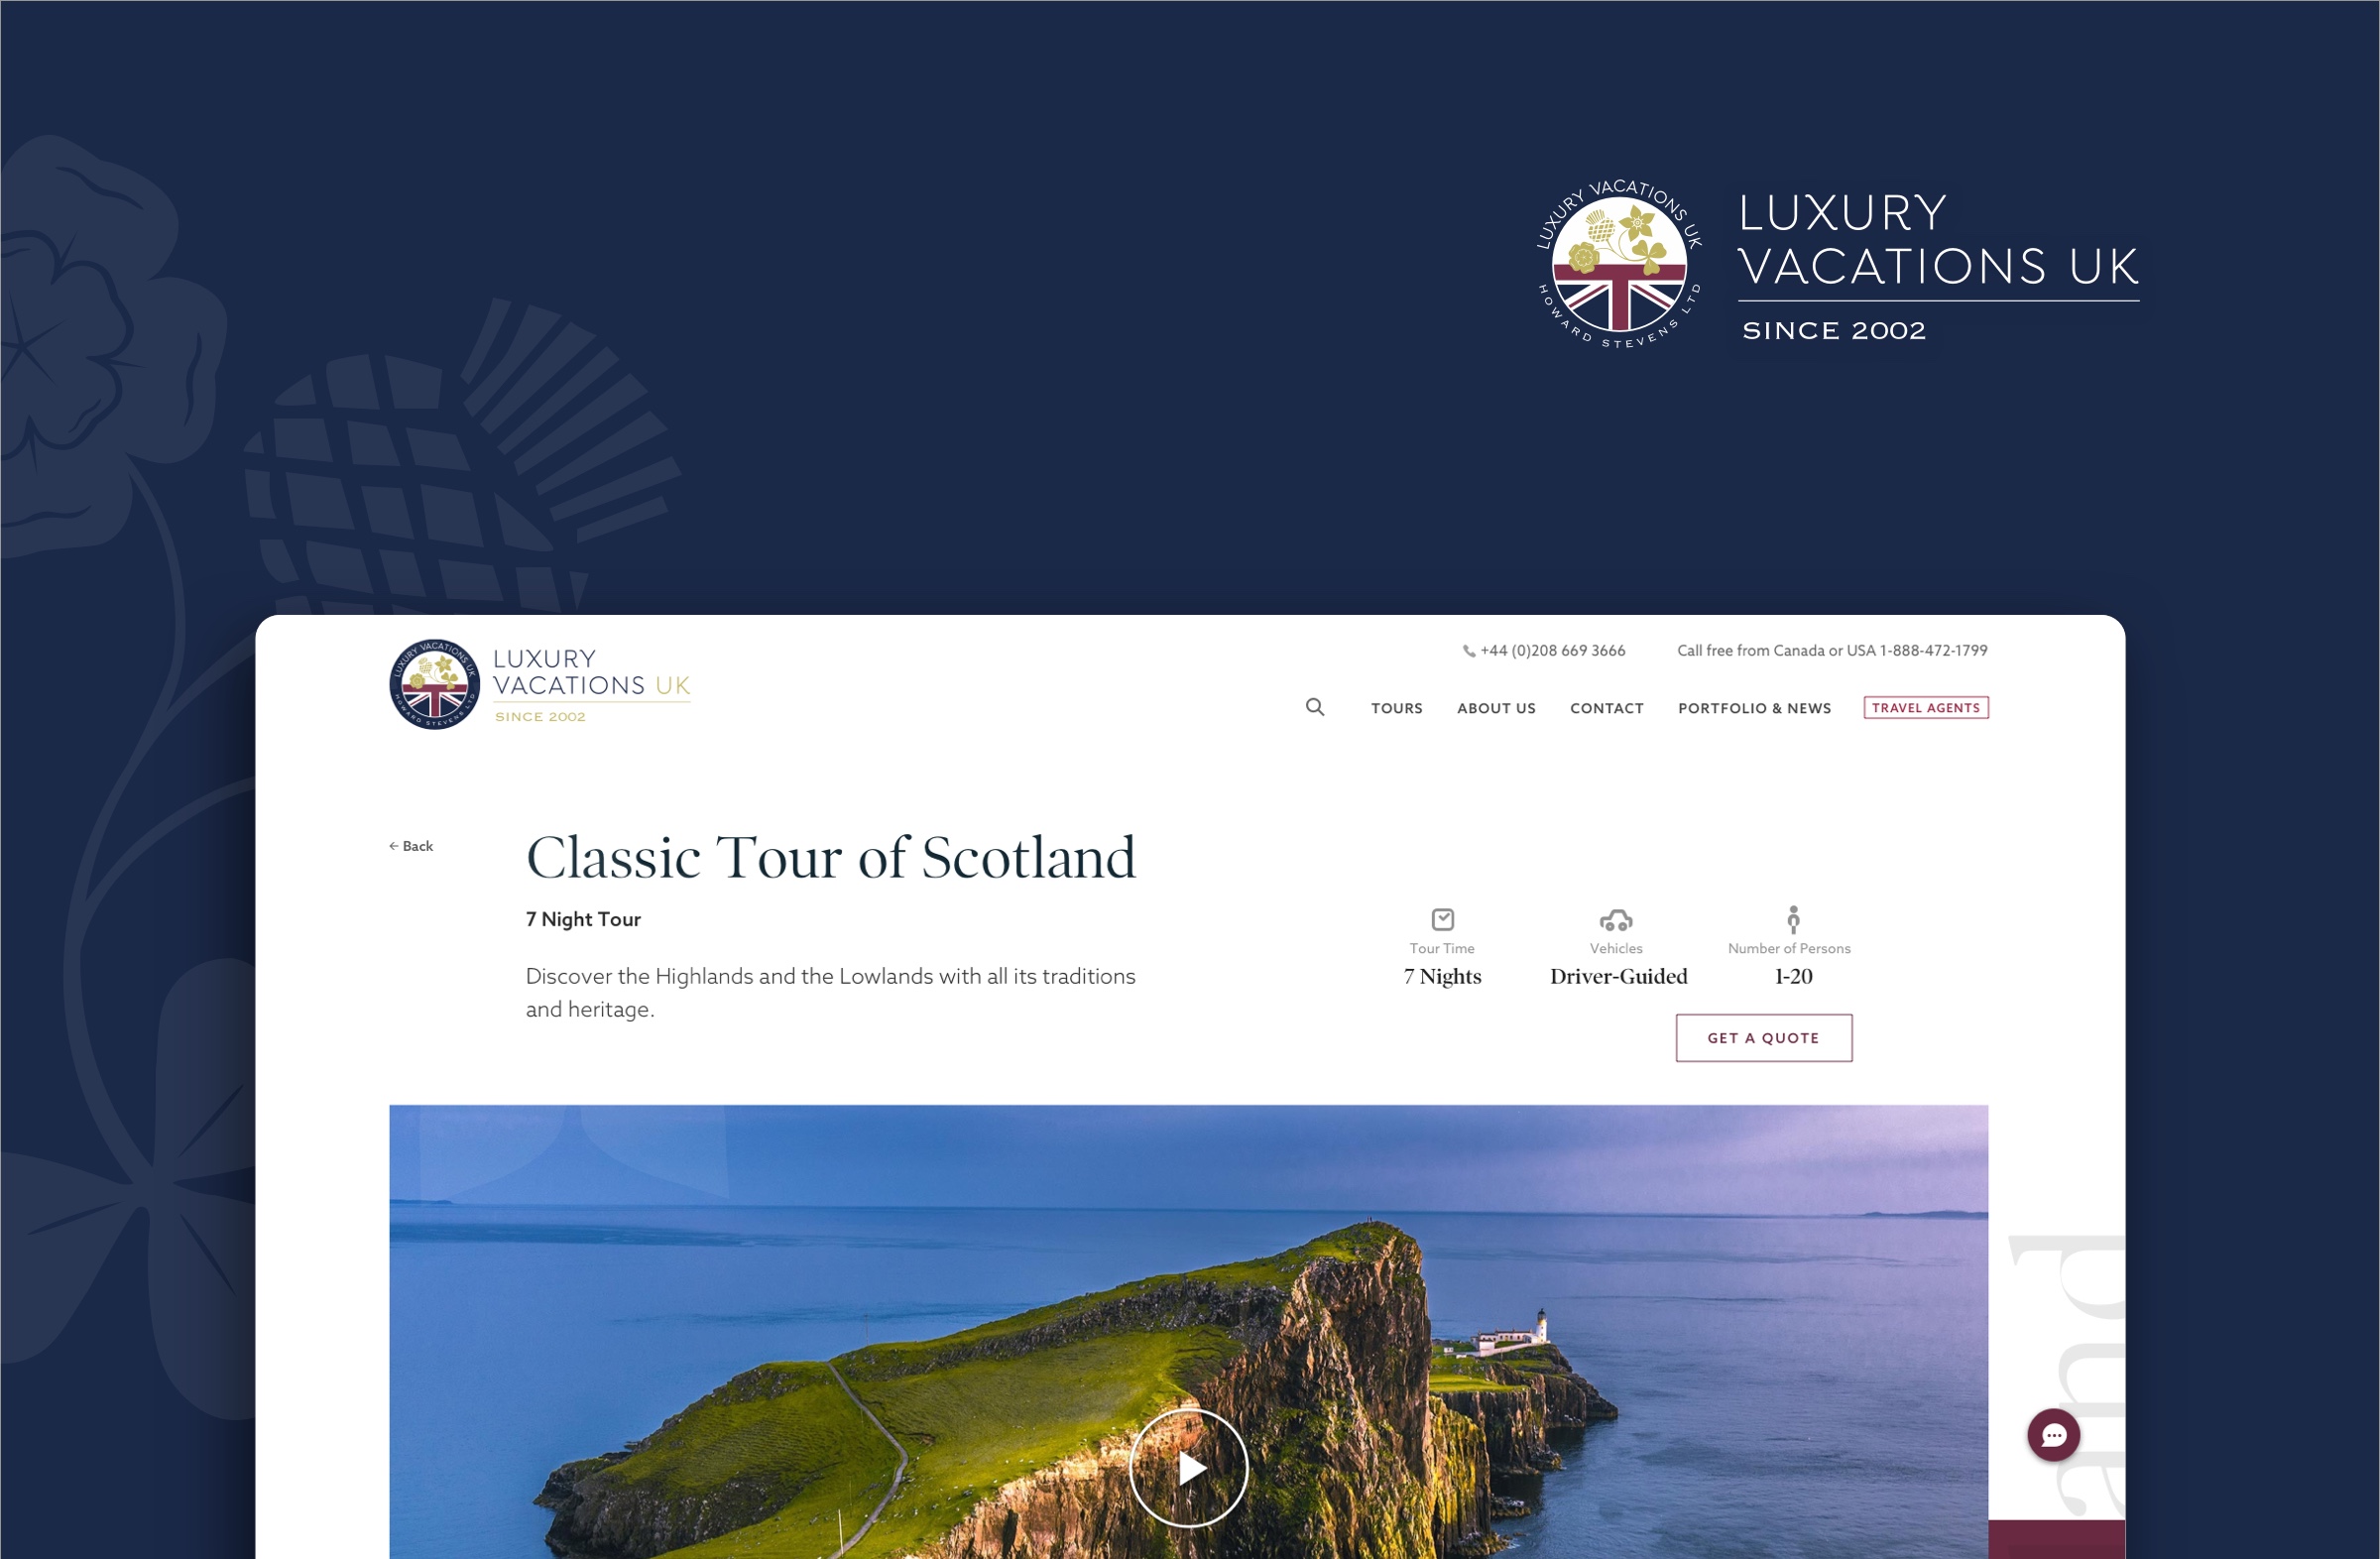 BACKBONE creates a tailor-made digital experience for Luxury Vacations UK and it’s customers.